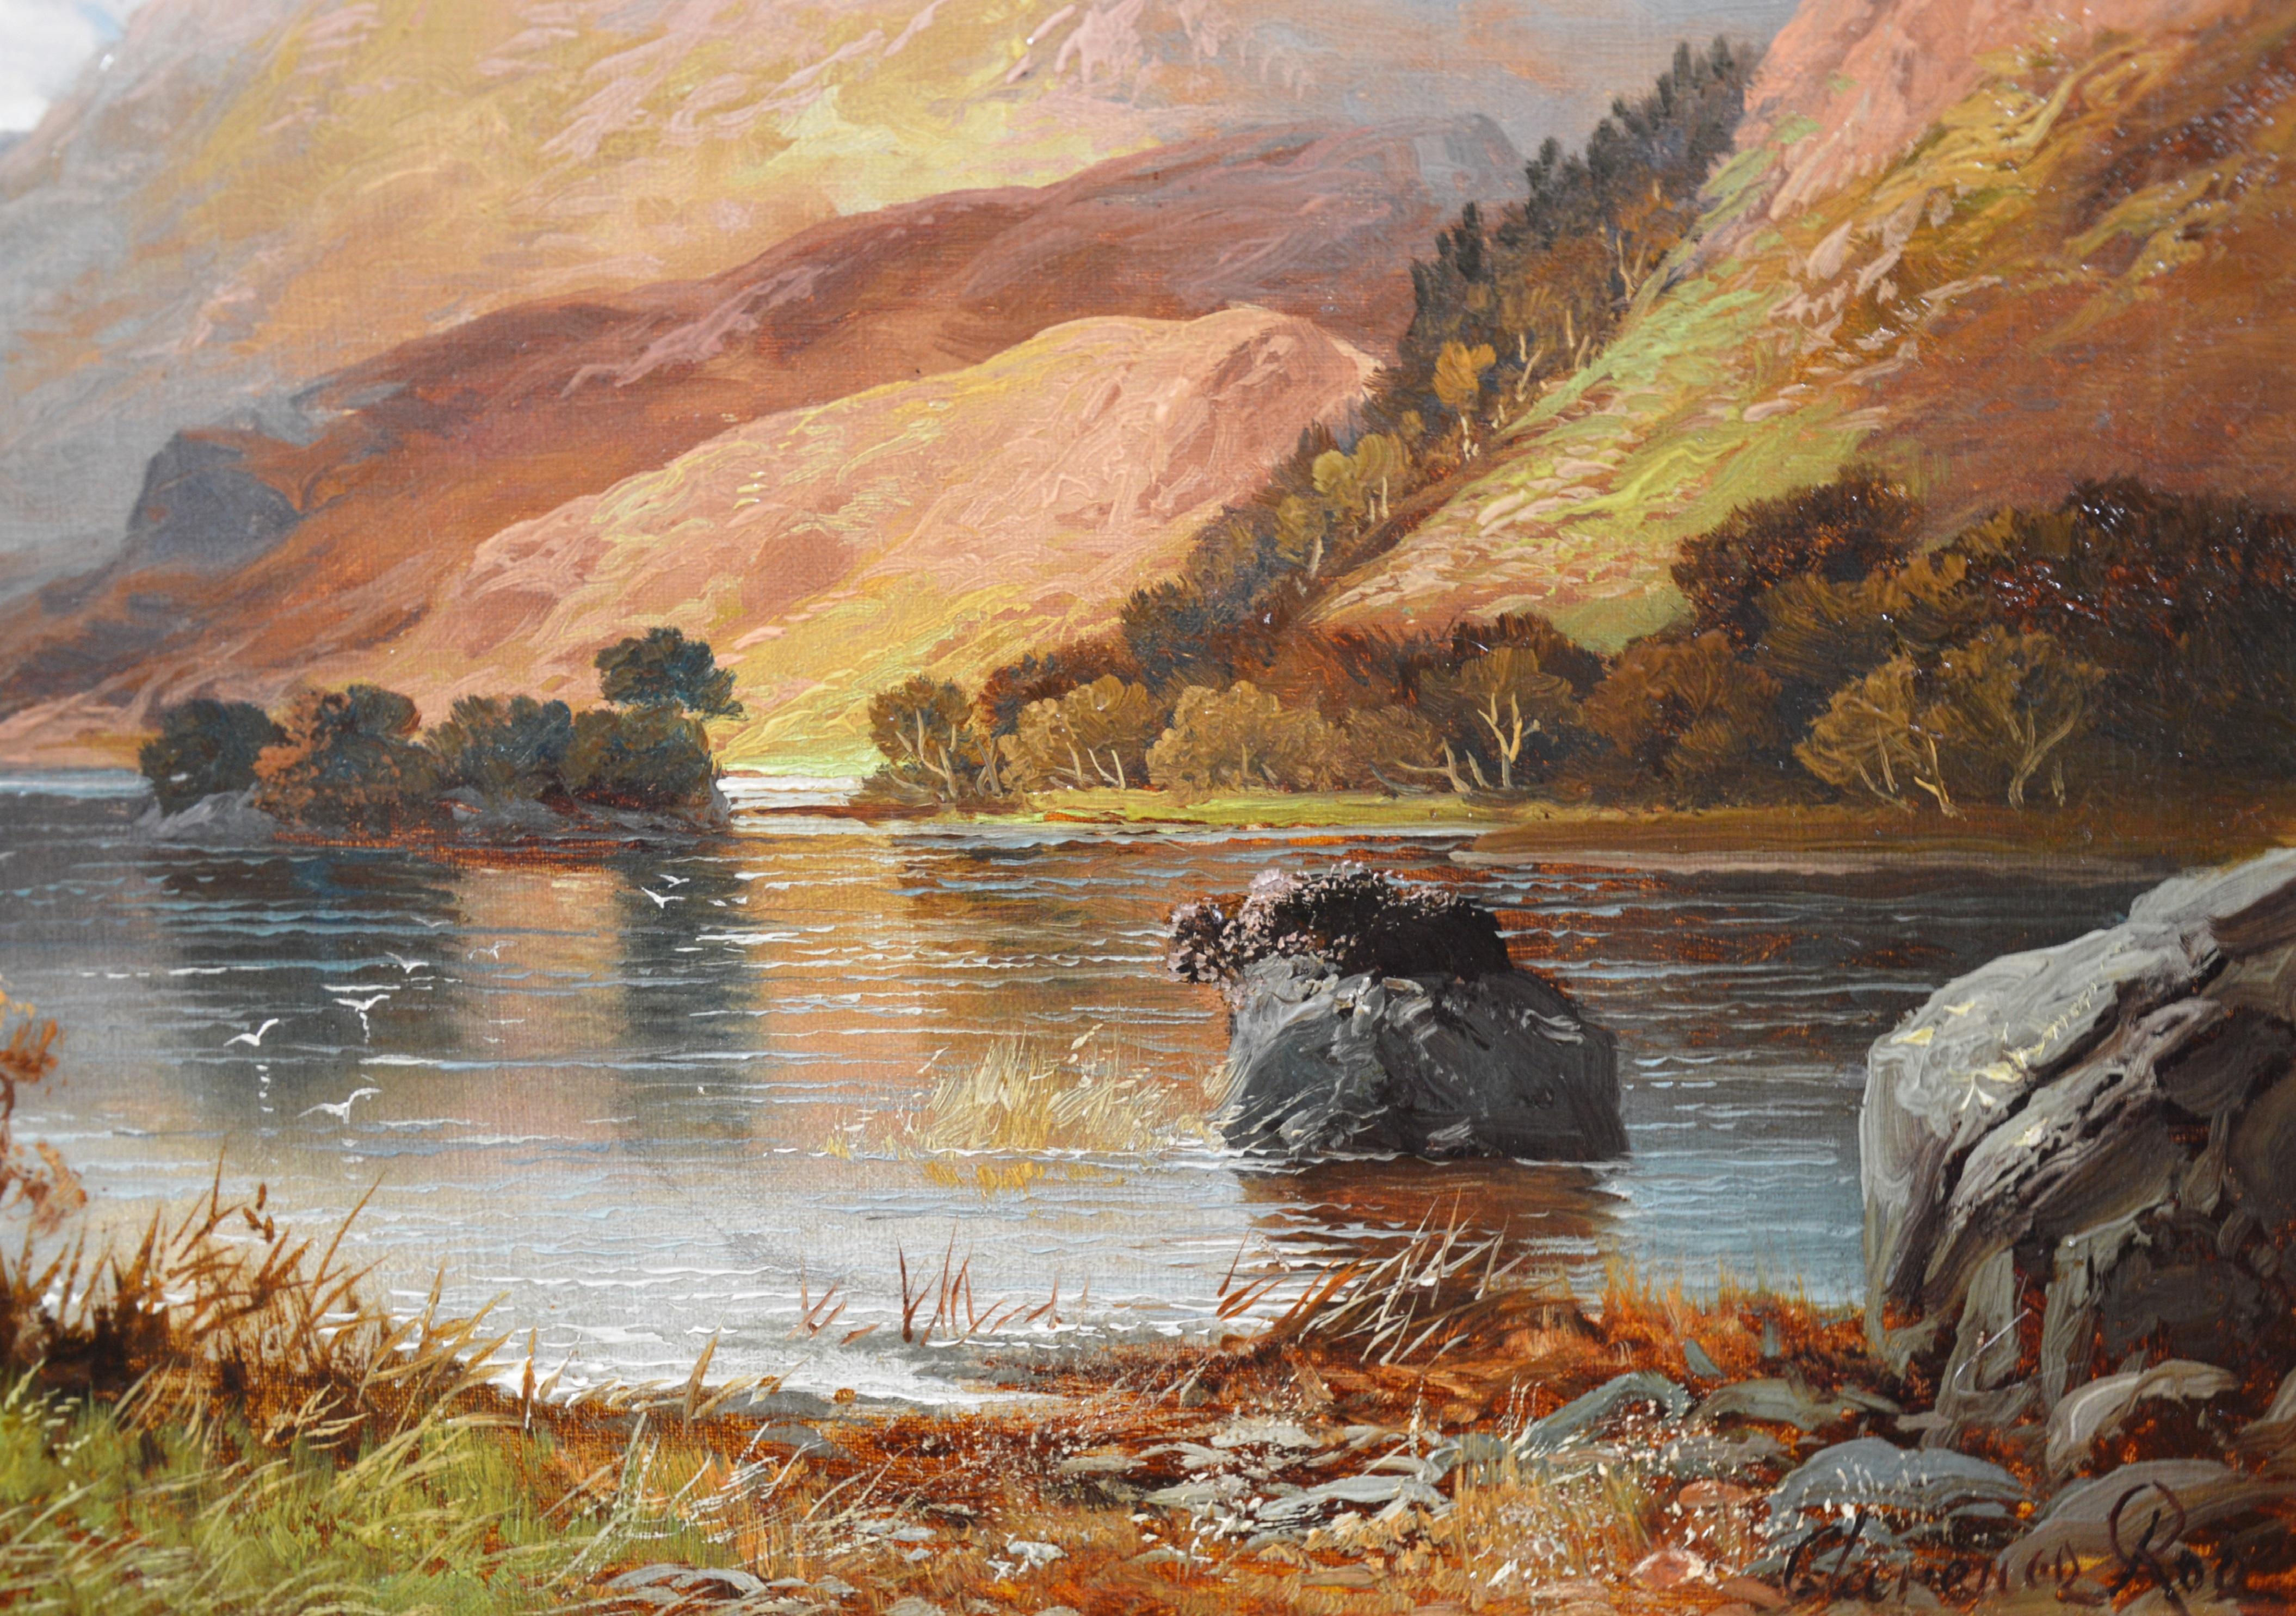 ‘Rydal Water, Westmorland’ by Clarence Henry Roe (1850-1909). Rydal Water is one of the smallest but possibly the most beautiful bodies of water in the Lake District, and the former home of both William Wordsworth and Thomas de Quincey. The painting